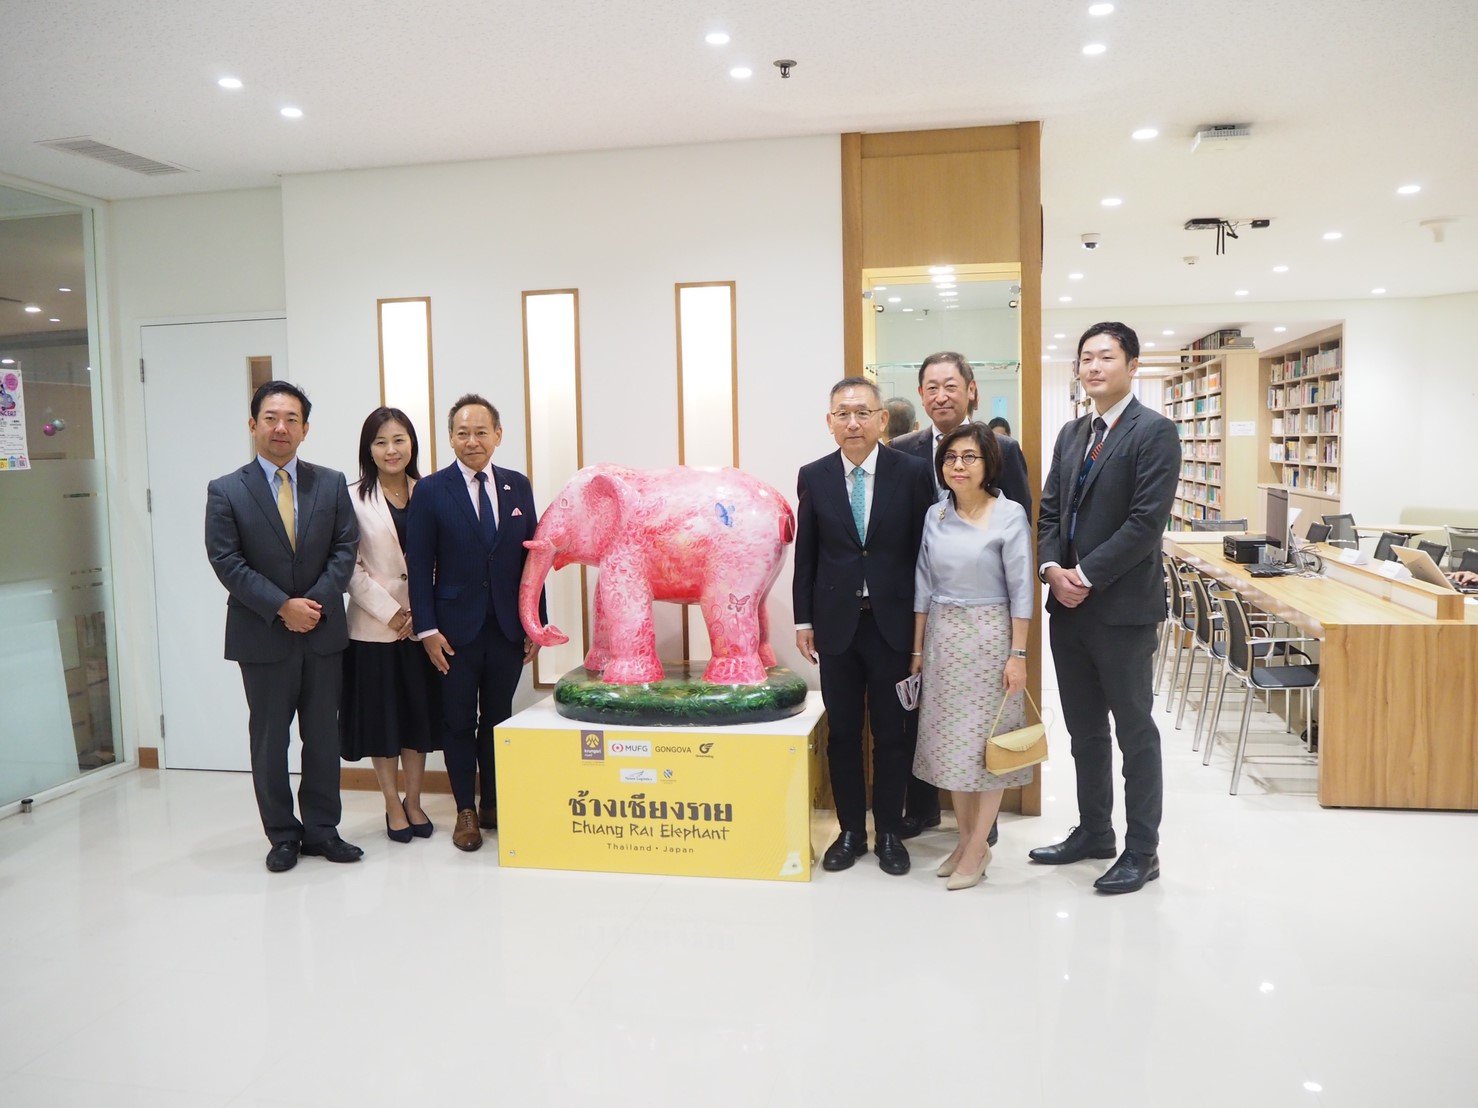 Deliver “Chiang Rai Elephants” to Japanese Association in Thailand